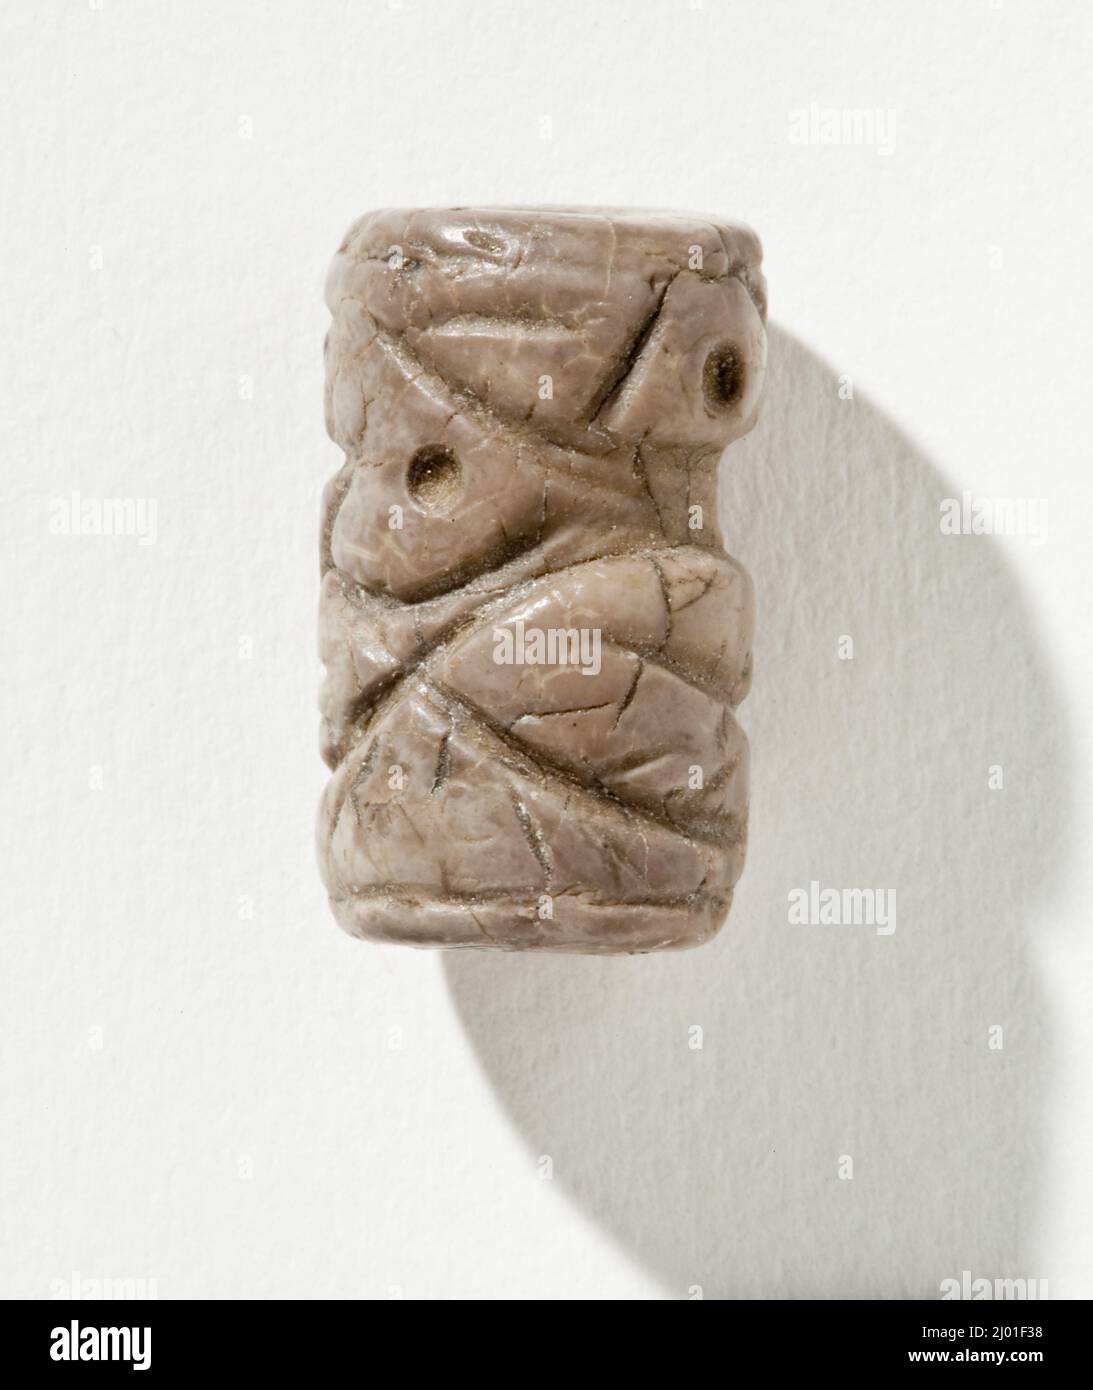 Cylinder Seal. Iran, Mesopotamia or Syria, Transitional period, about 2900-2800 B.C.. Tools and Equipment; seals. Gray marble Stock Photo